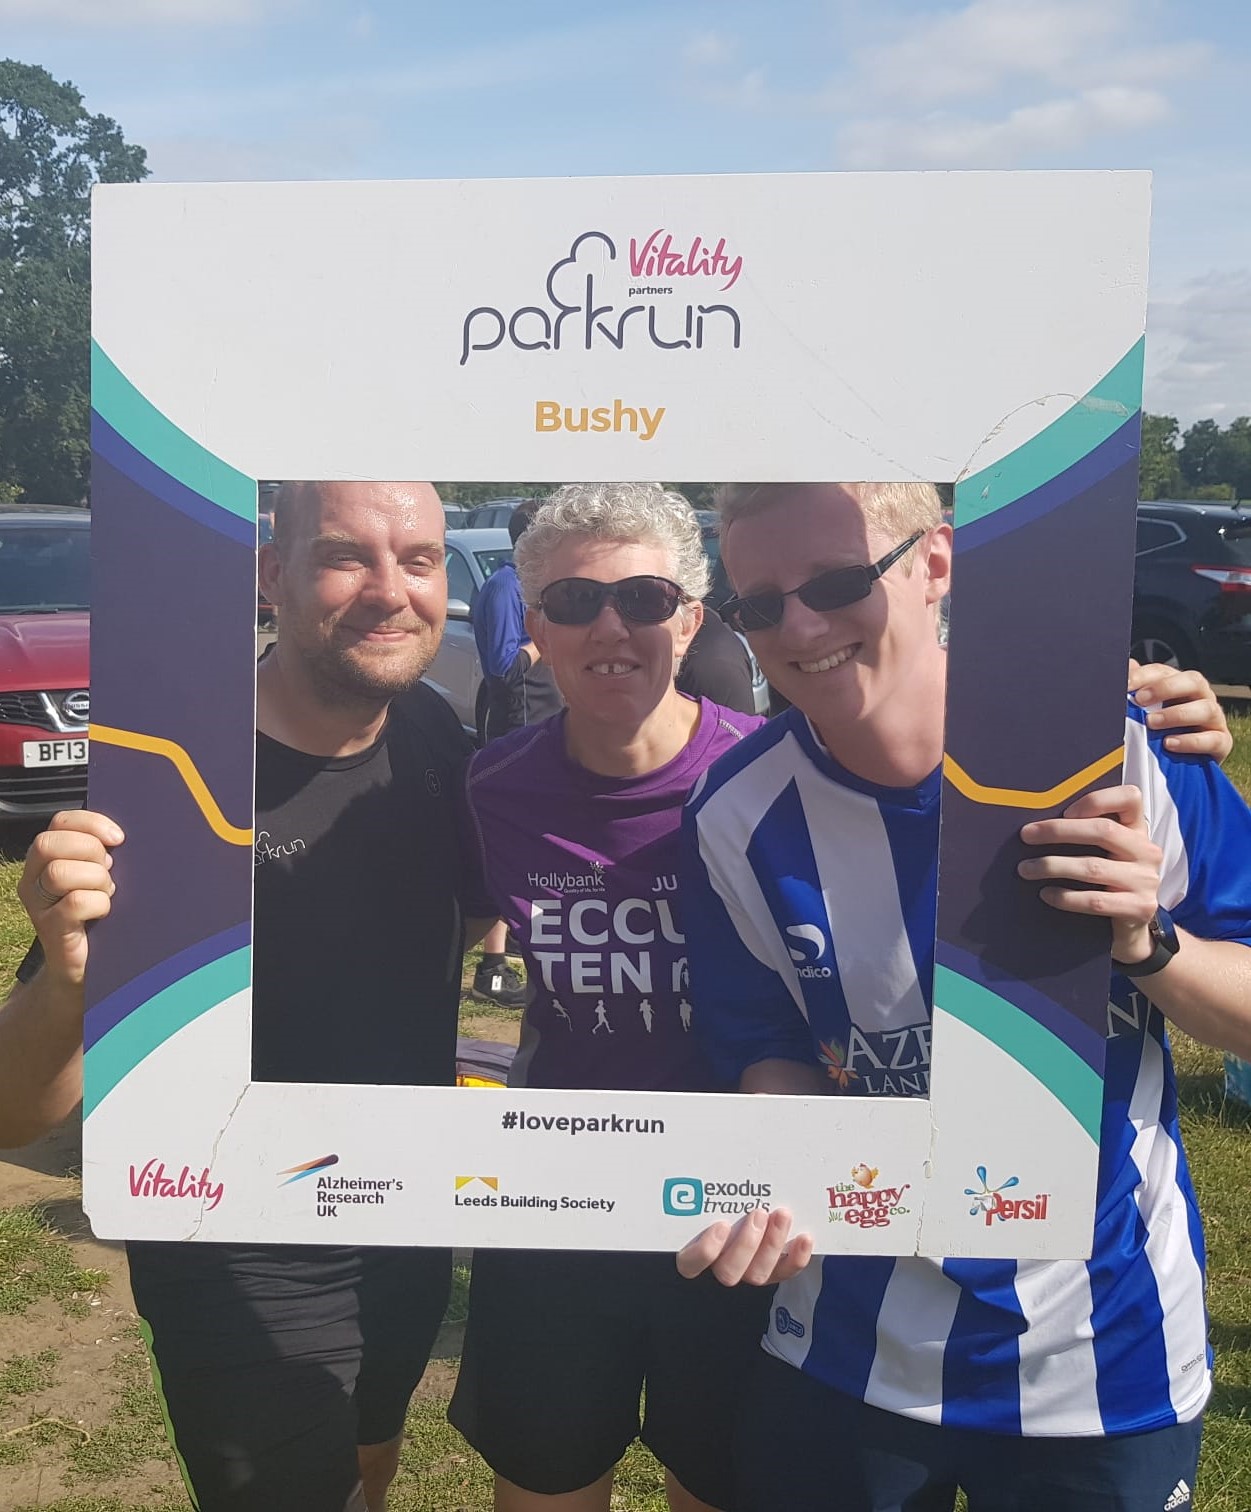 Phil, Kathryn and Stephen at Busy parkrun holding the selfie frame with the parkrun logo and Bushy on it